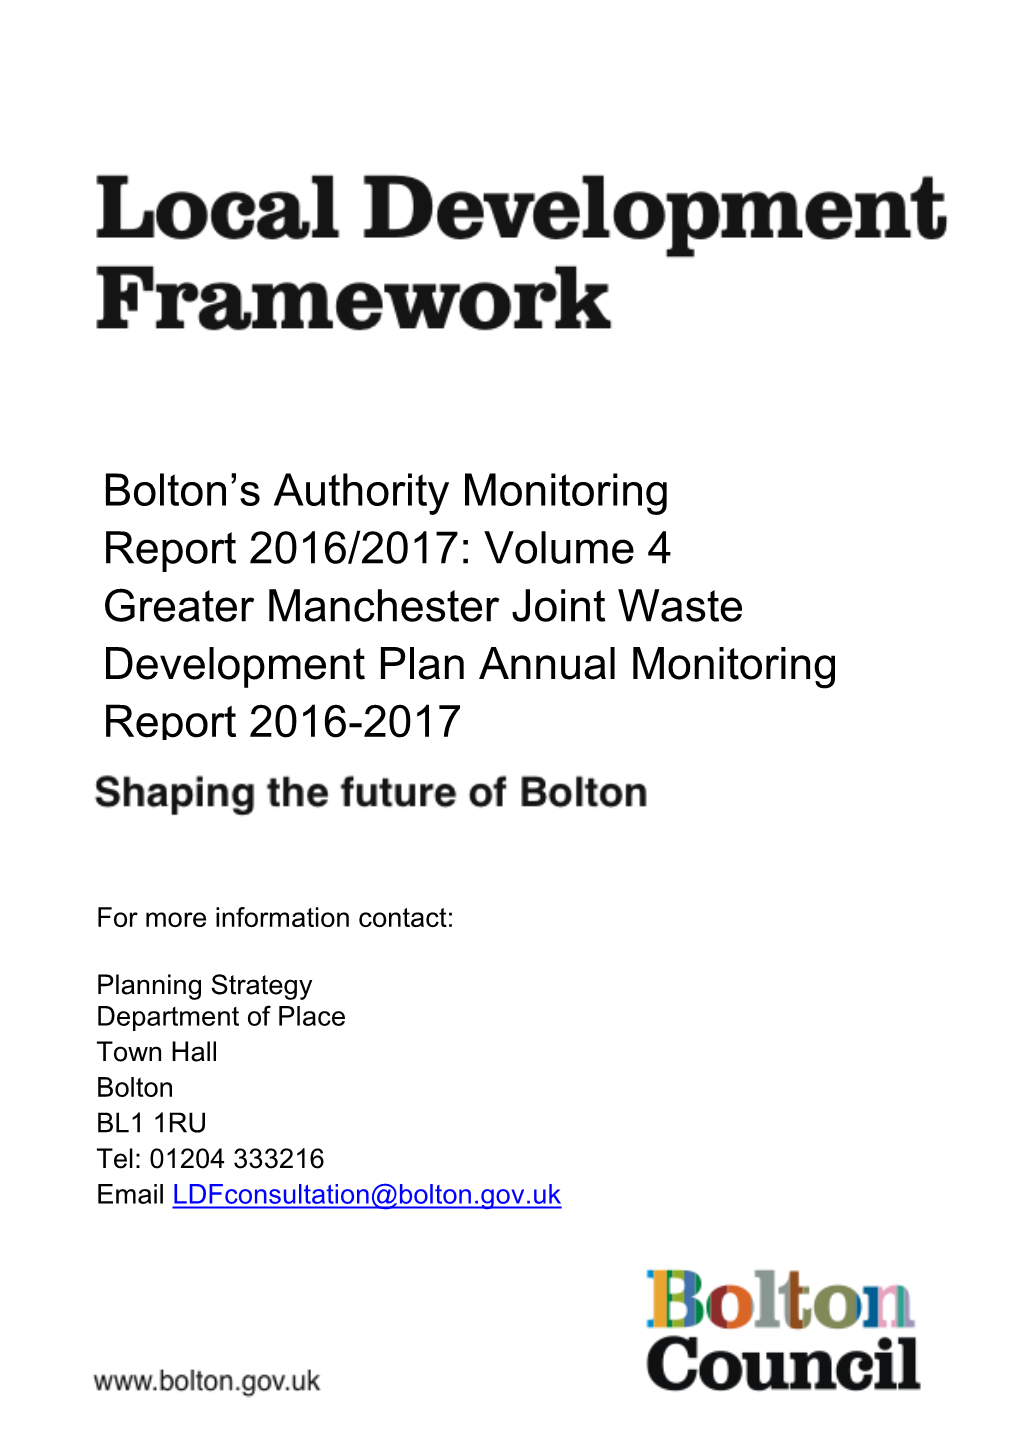 Bolton's Authority Monitoring Report 2016/2017